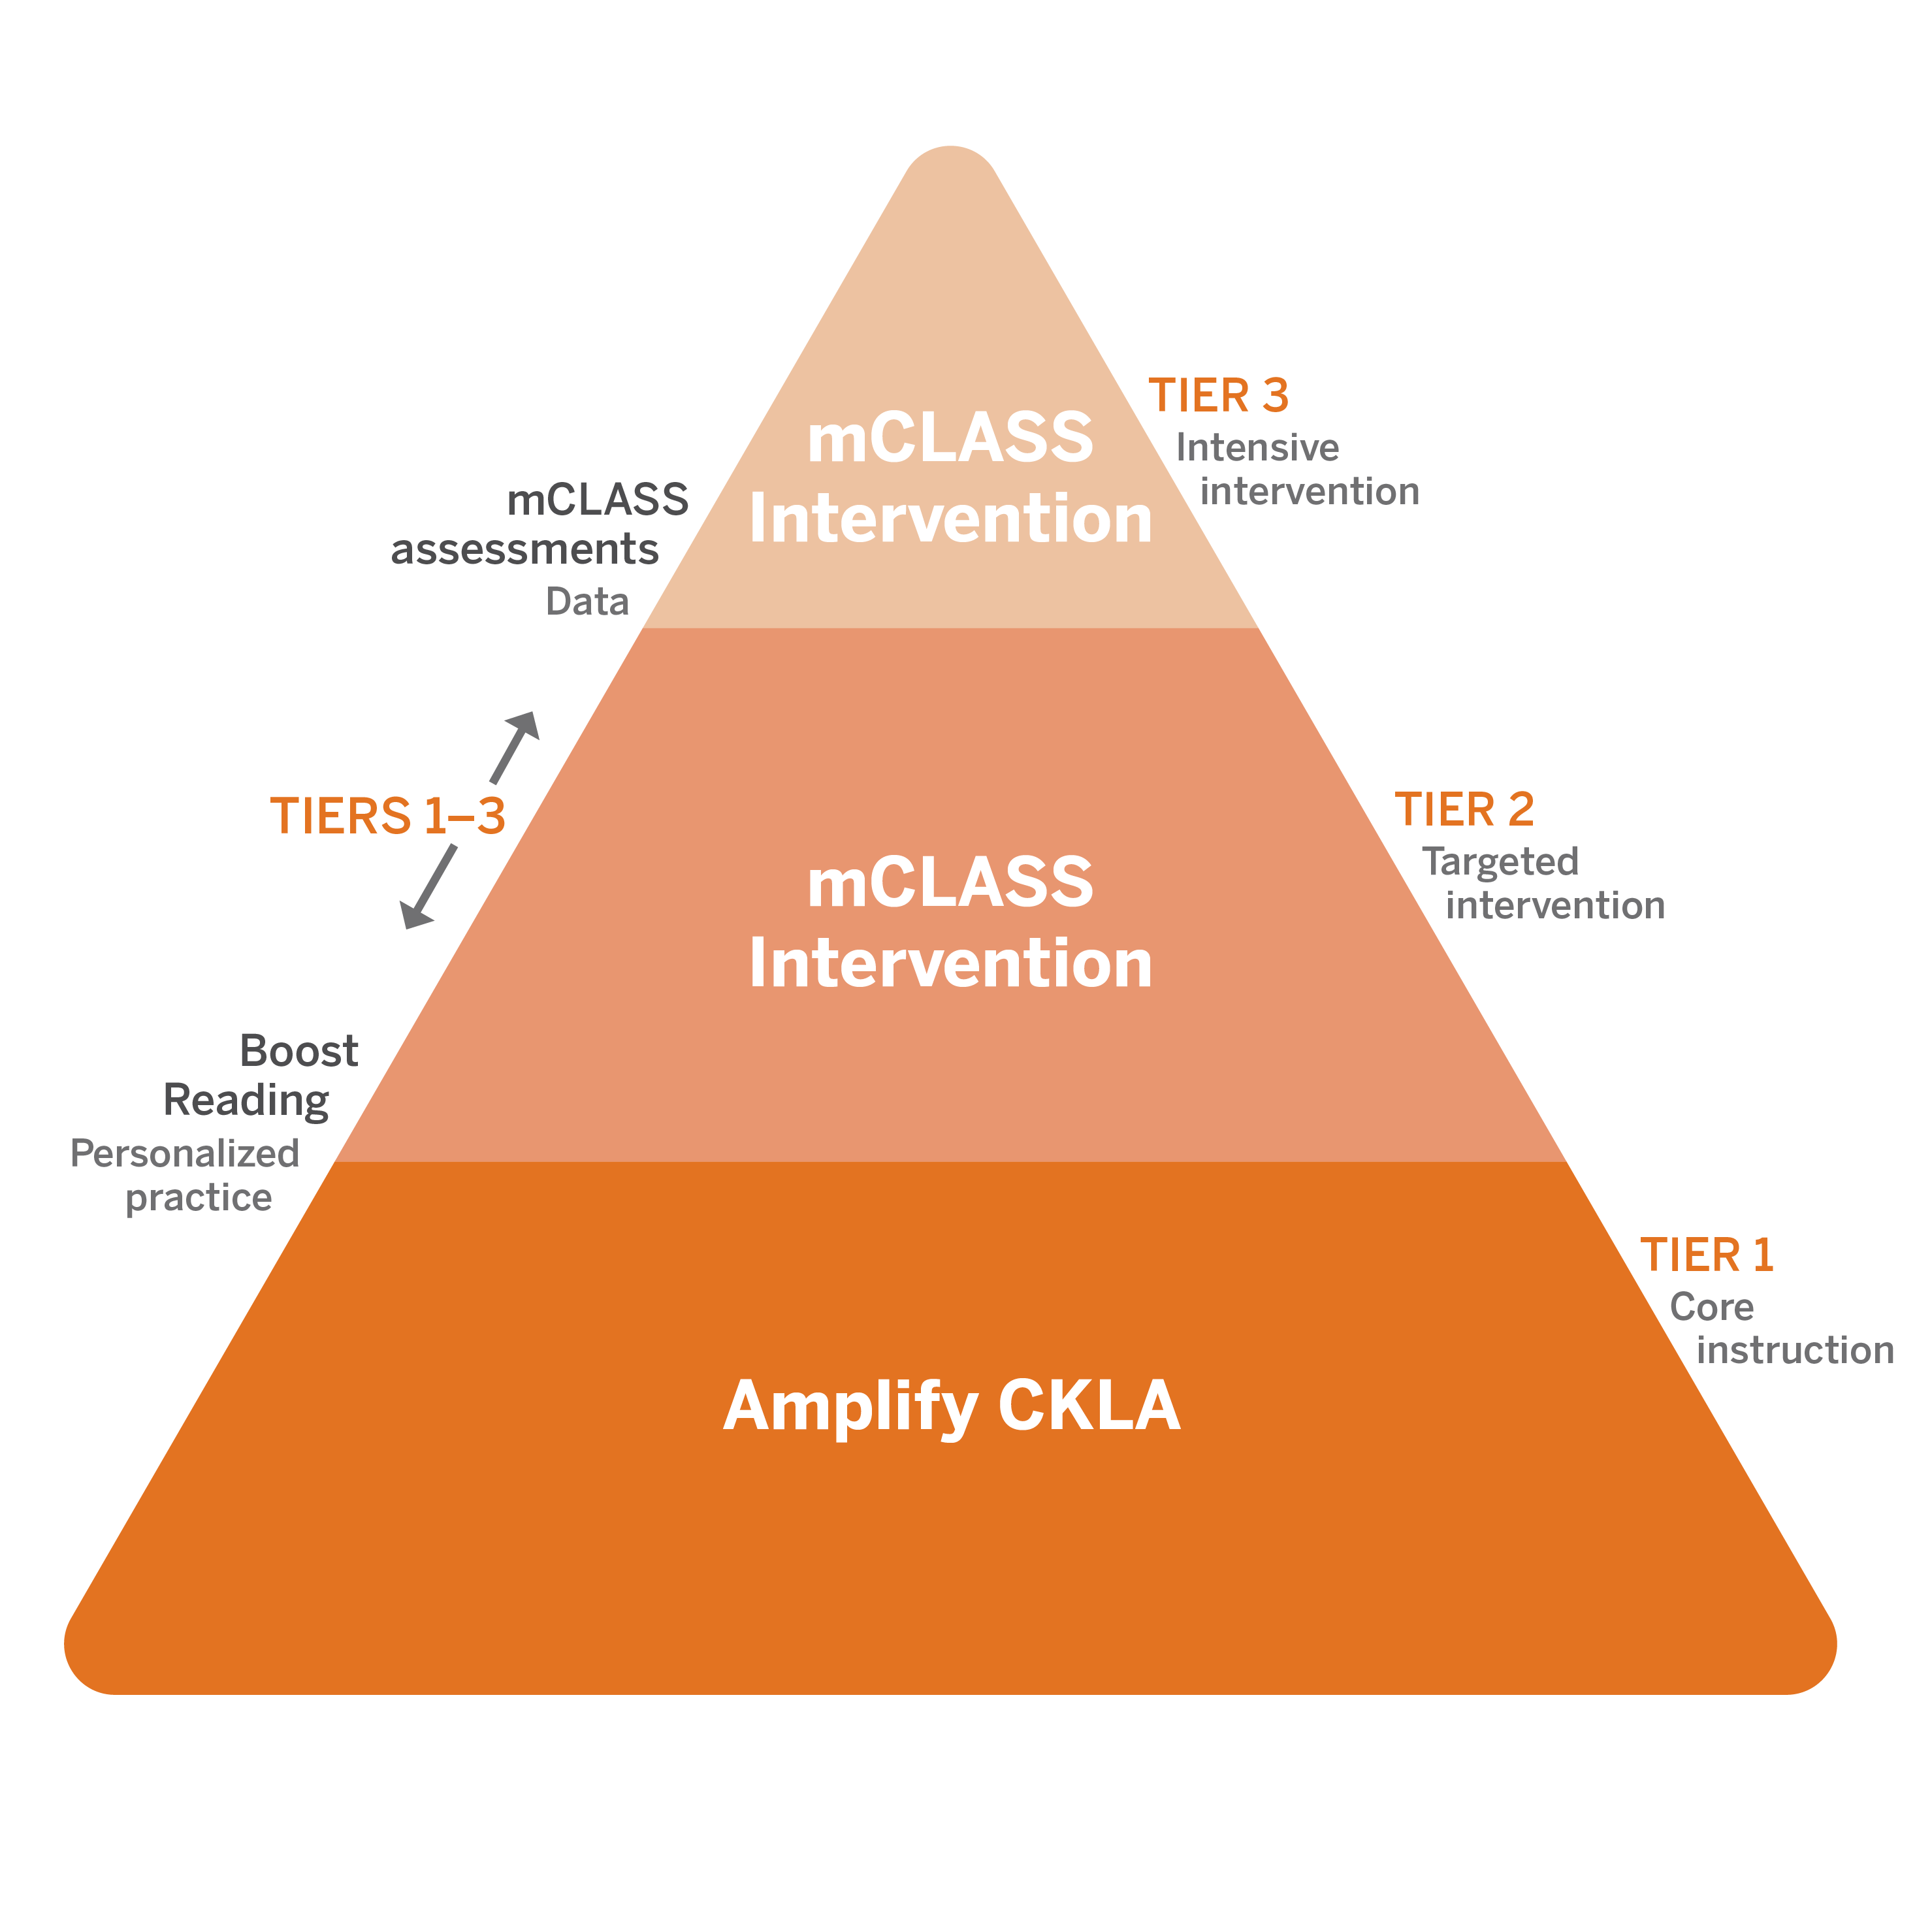 Orange triangular diagram showing educational tiers: tier 3 at top with 'intensive intervention' specifically in science of reading, tier 2 'targeted intervention' in the middle, and tier 1